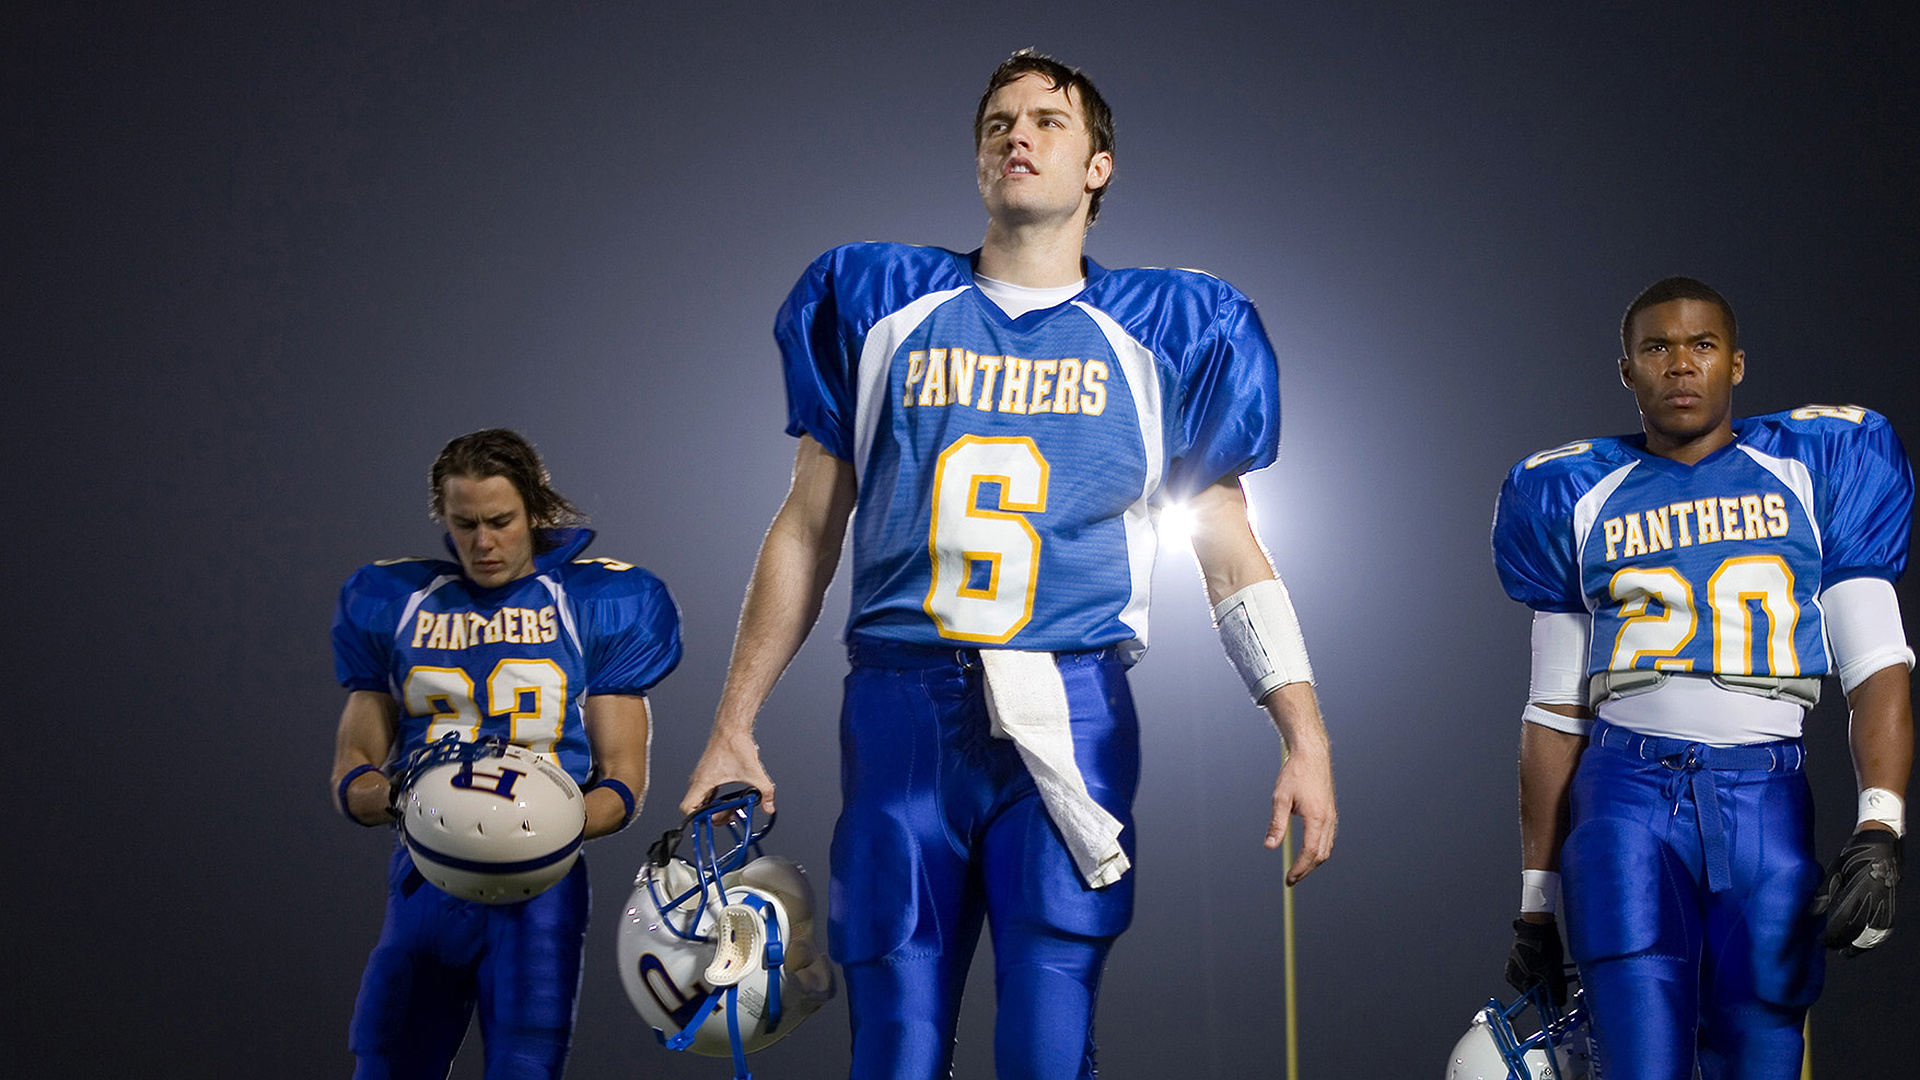 Friday Night Lights: The series was renewed for a second season in May 2007. 1920x1080 Full HD Wallpaper.